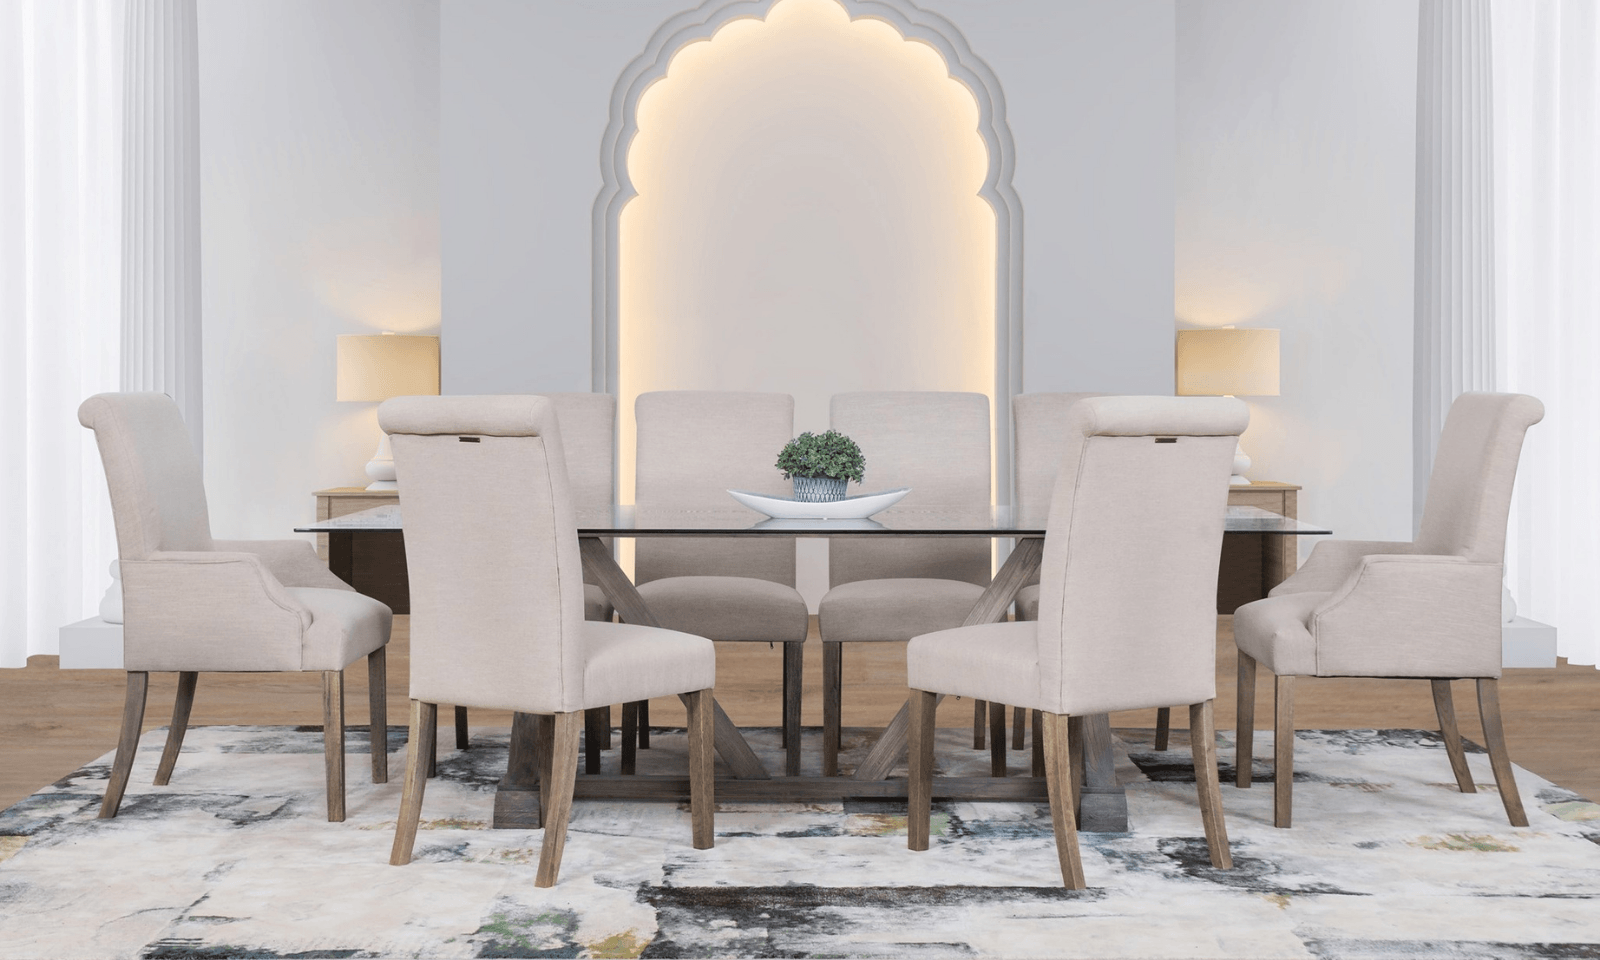 BUILD YOUR OWN CUSTOM DINING ROOM SET